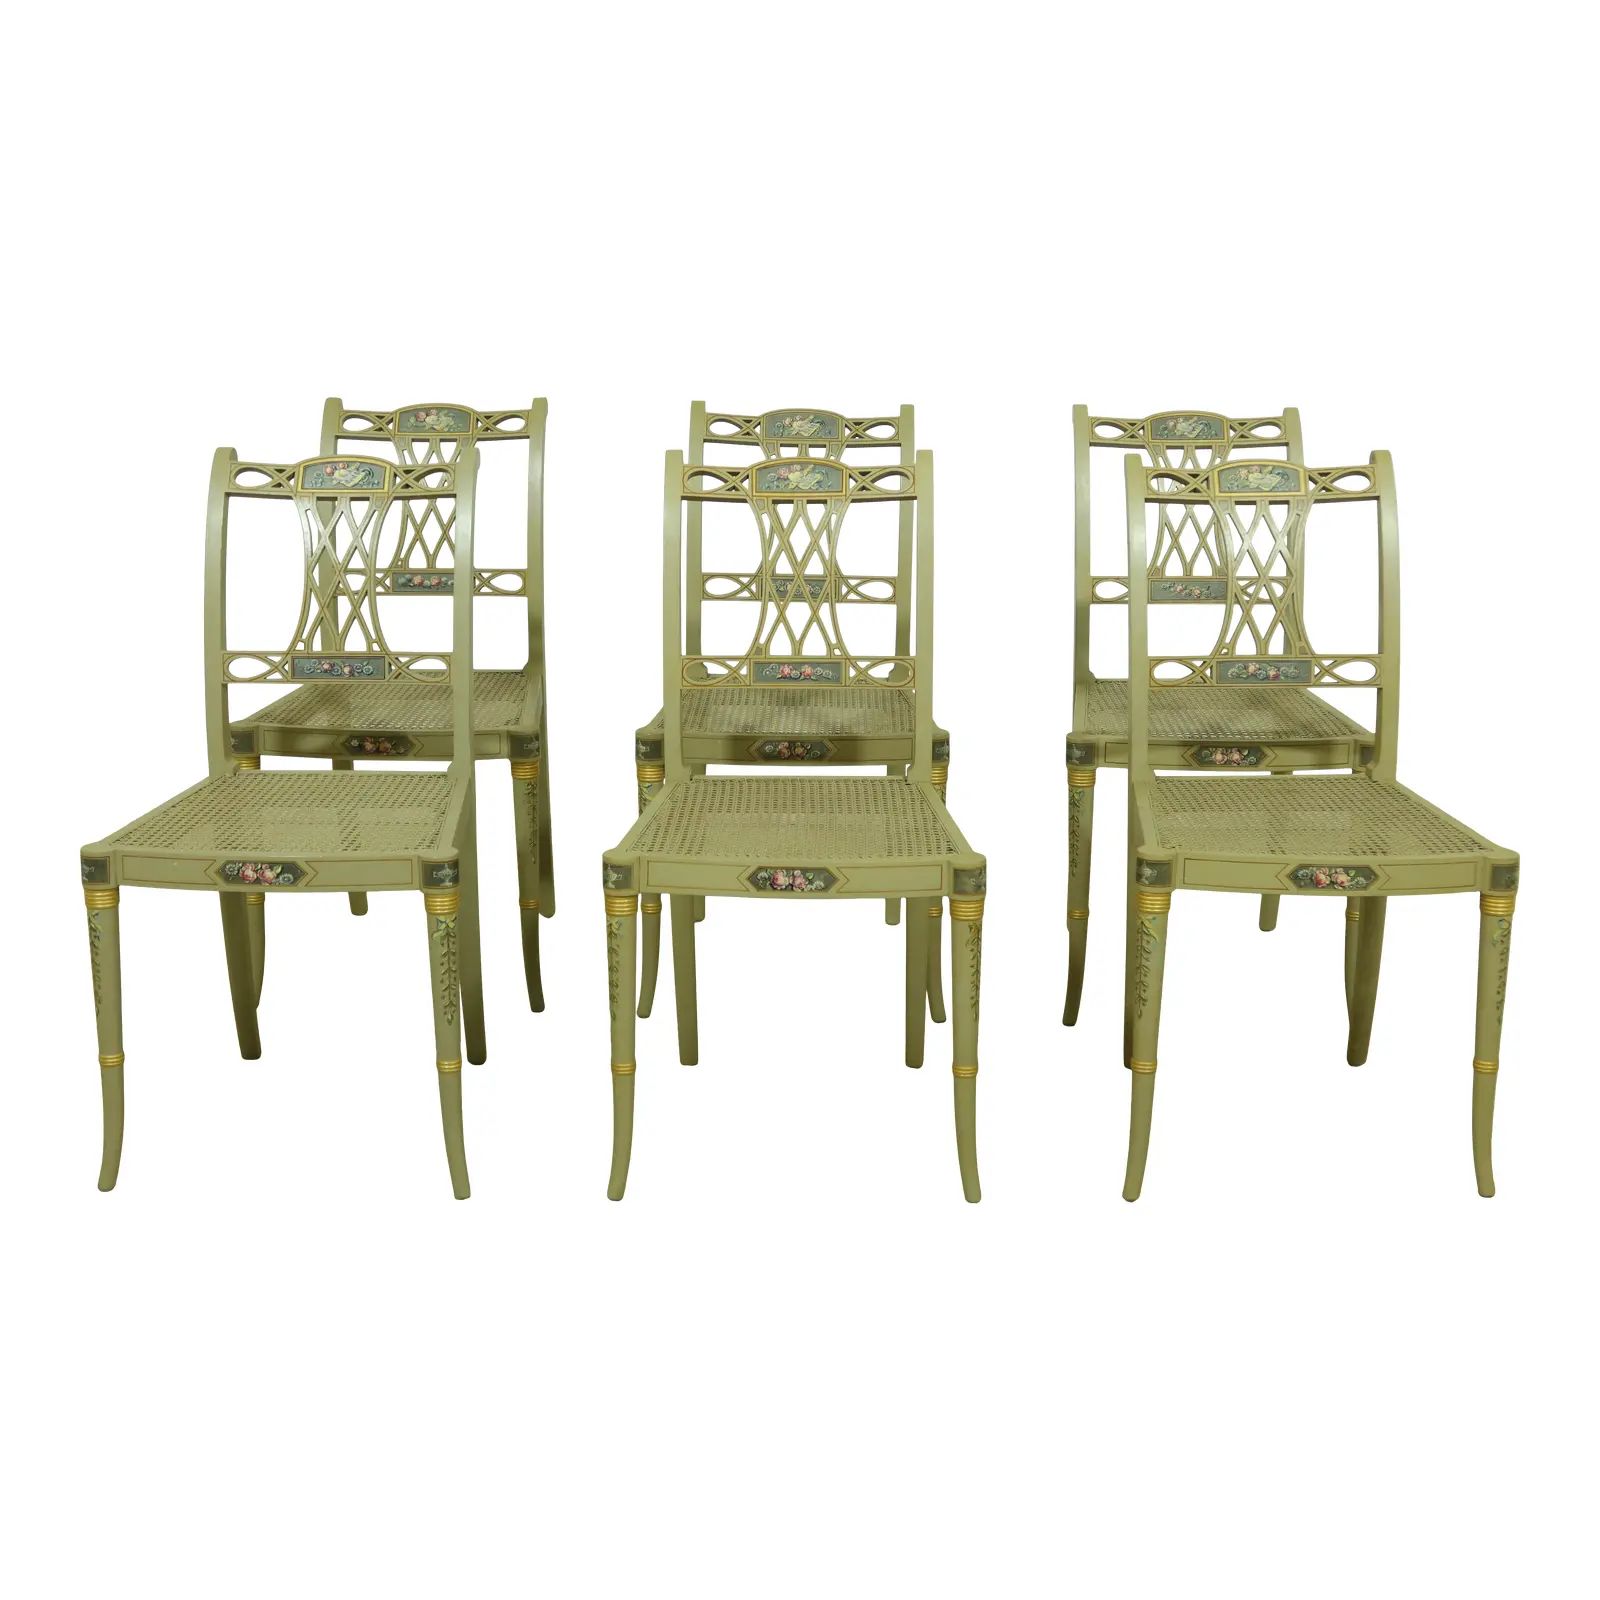 Set of 6 Adam Style Paint Decorated Dining Room Chairs | Chairish